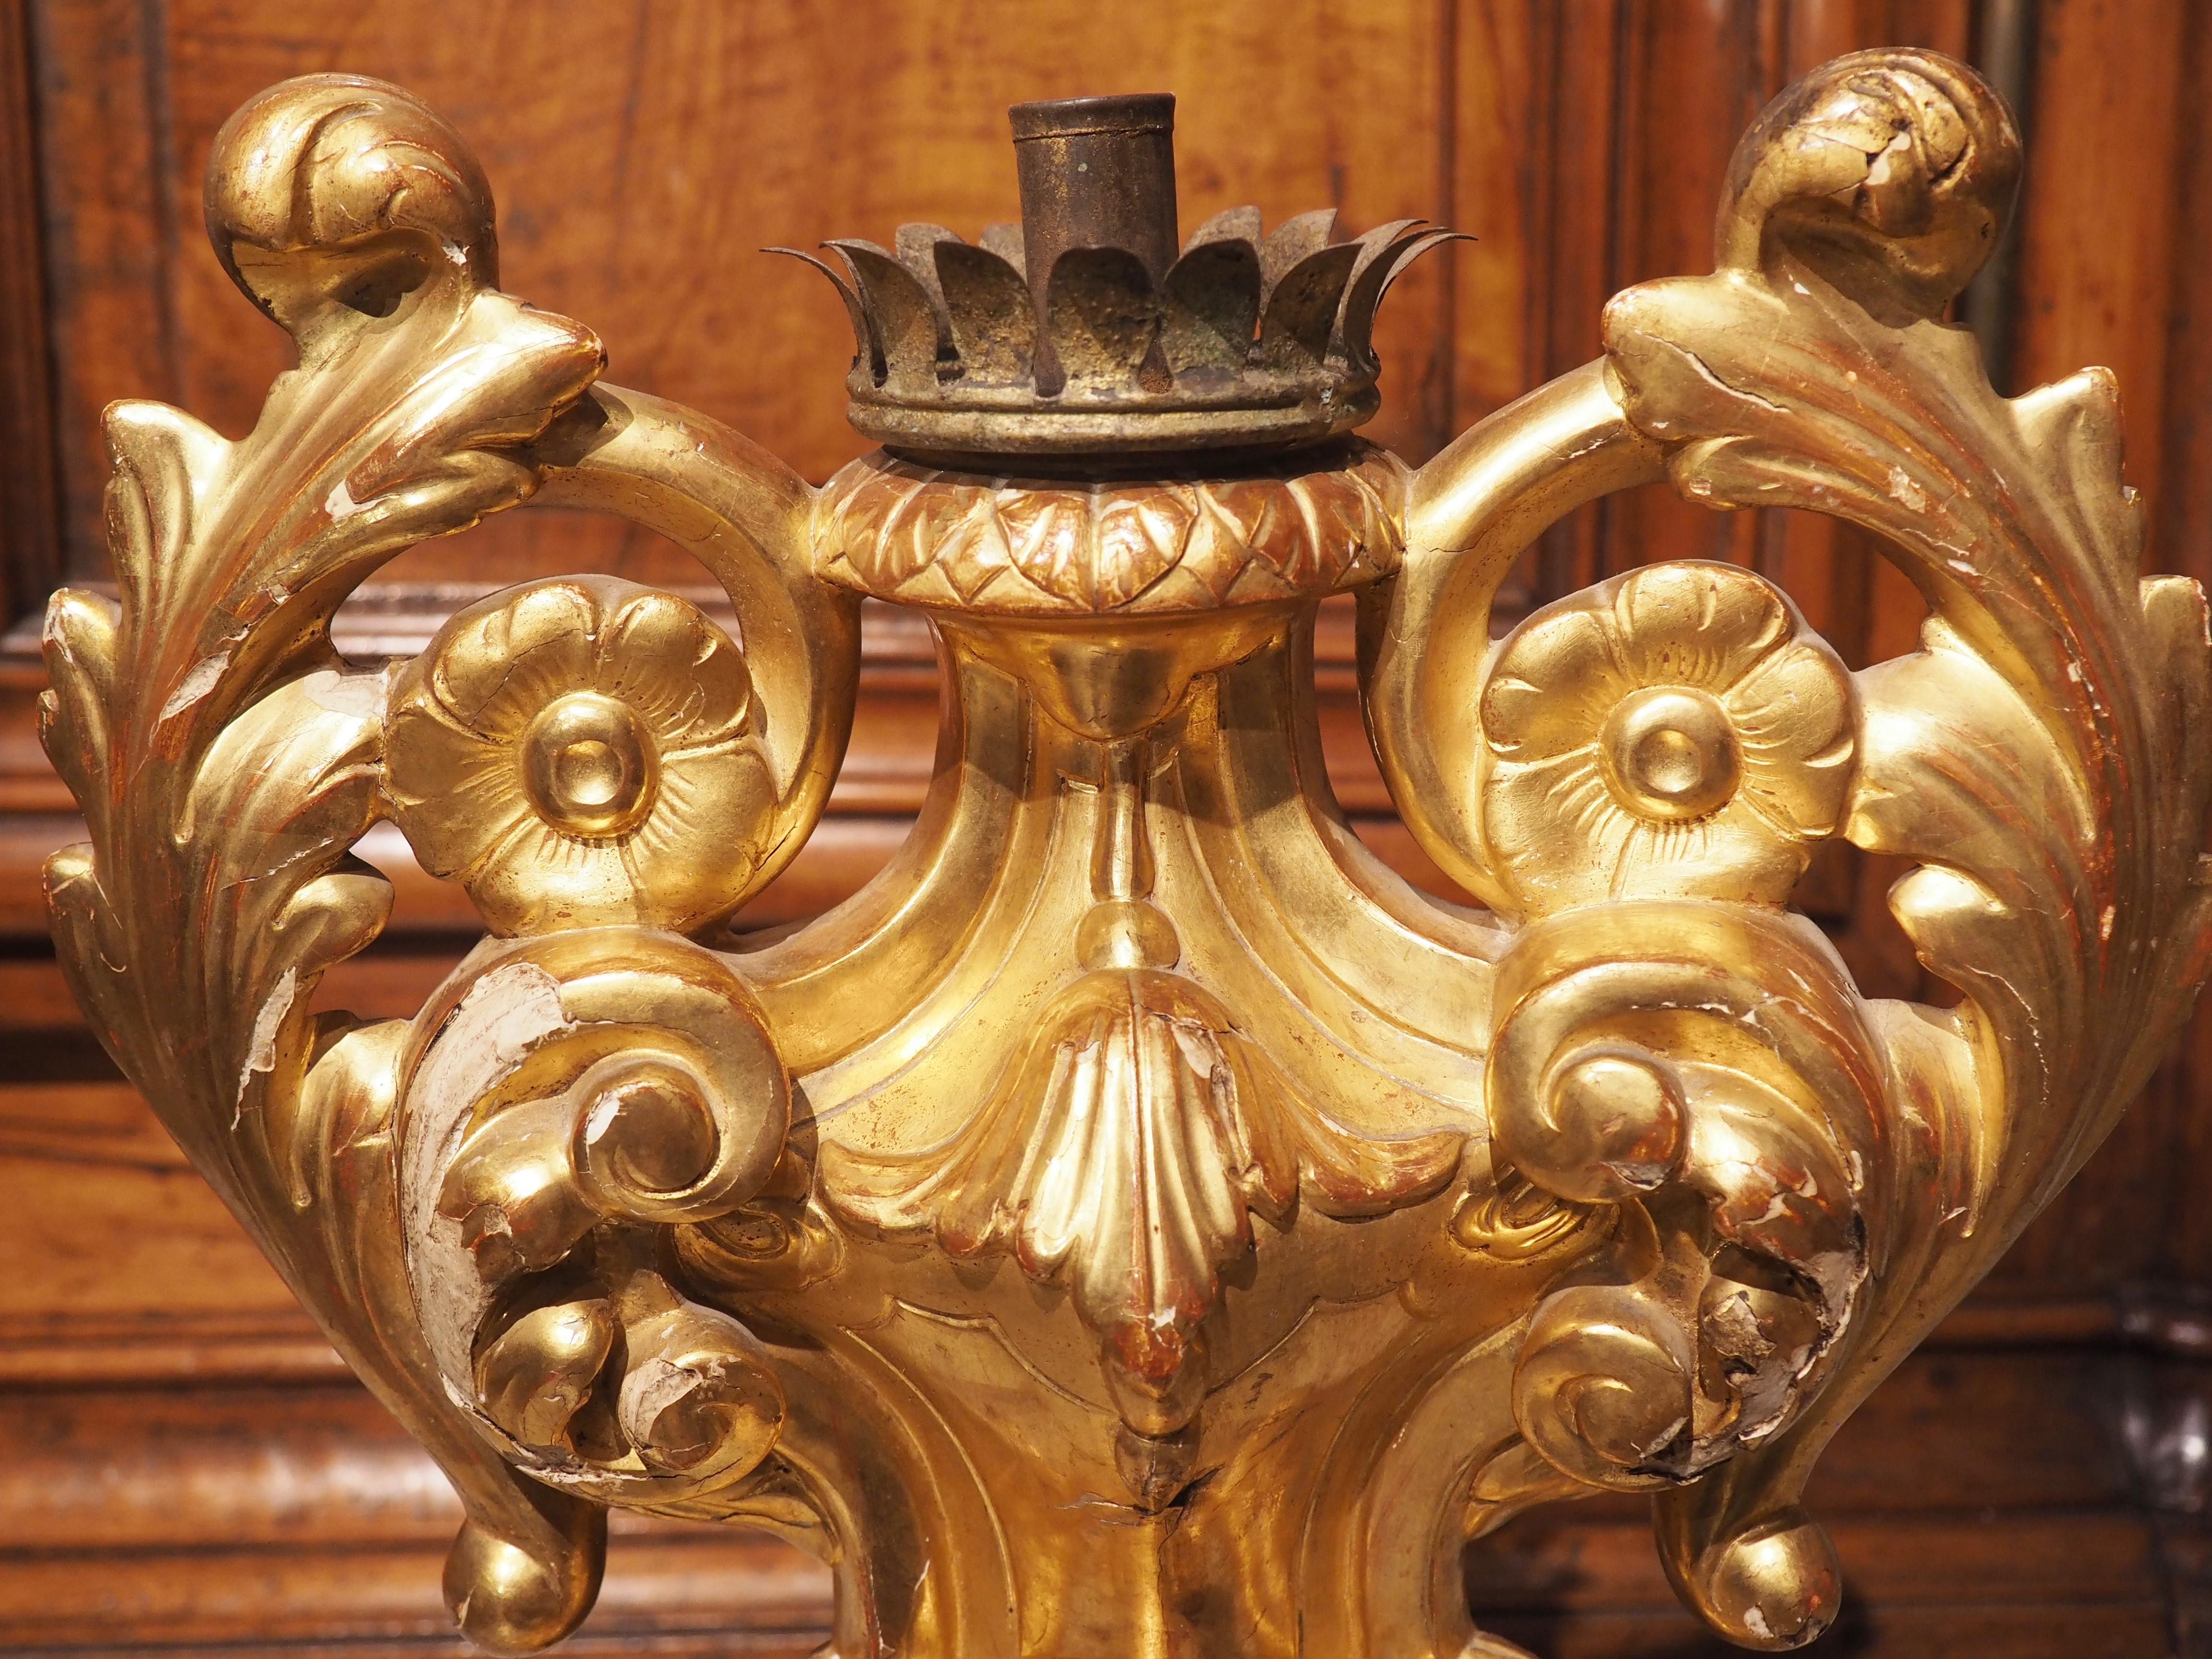 Hand-carved in the late 1700’s (the Baroque period) in Italy, this giltwood candleholder features an impressive floral and foliate rinceaux surrounding a single iron bobeche with a curled leaf edge. There is a protruding ring adorned with scalloped